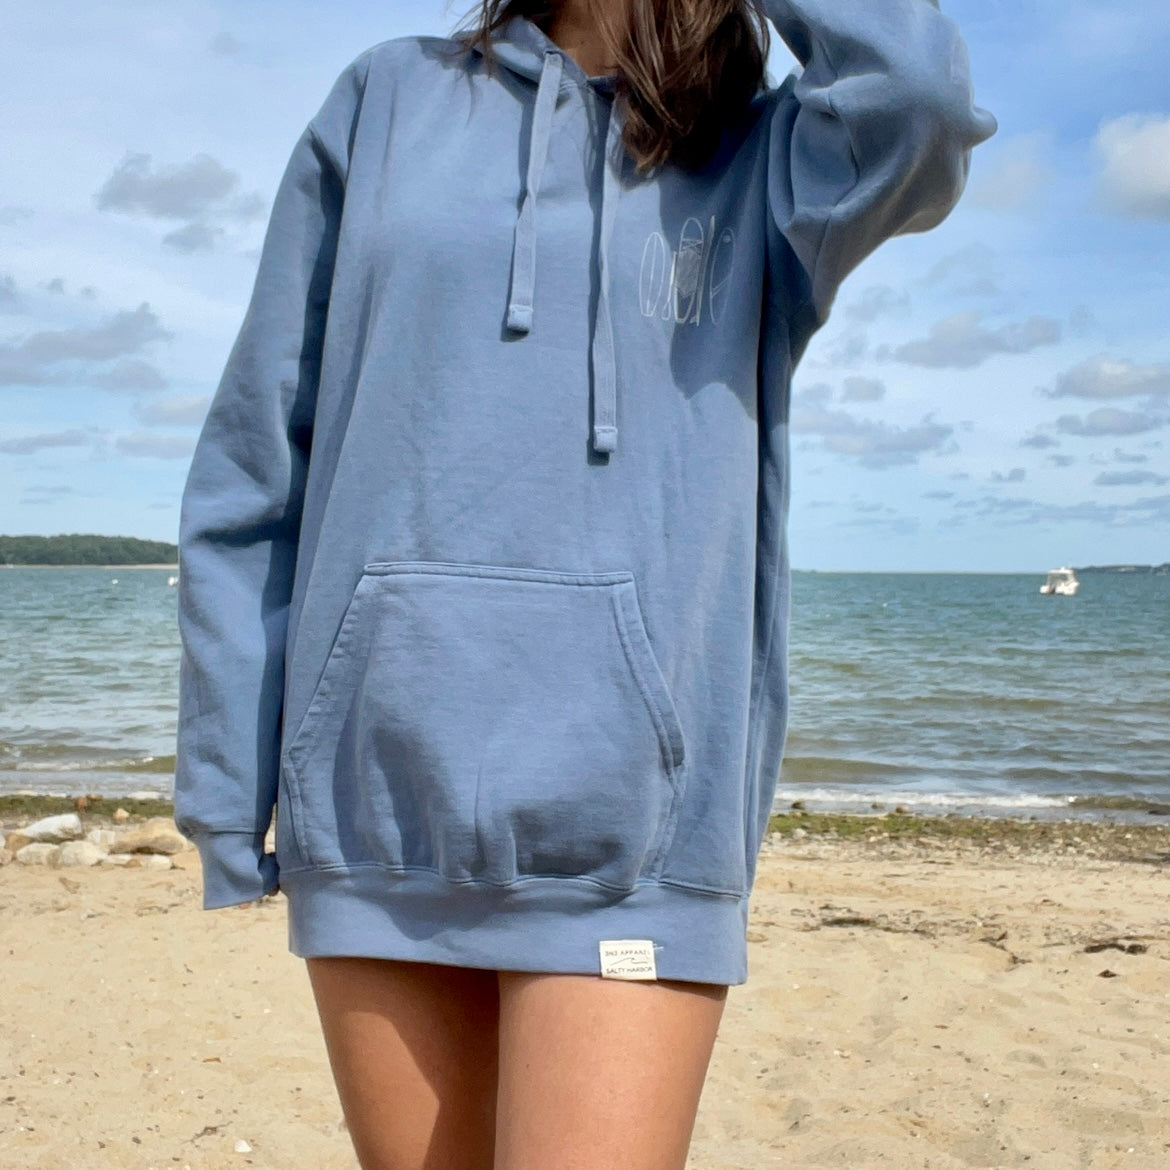 Surfboard Pullover in Blue